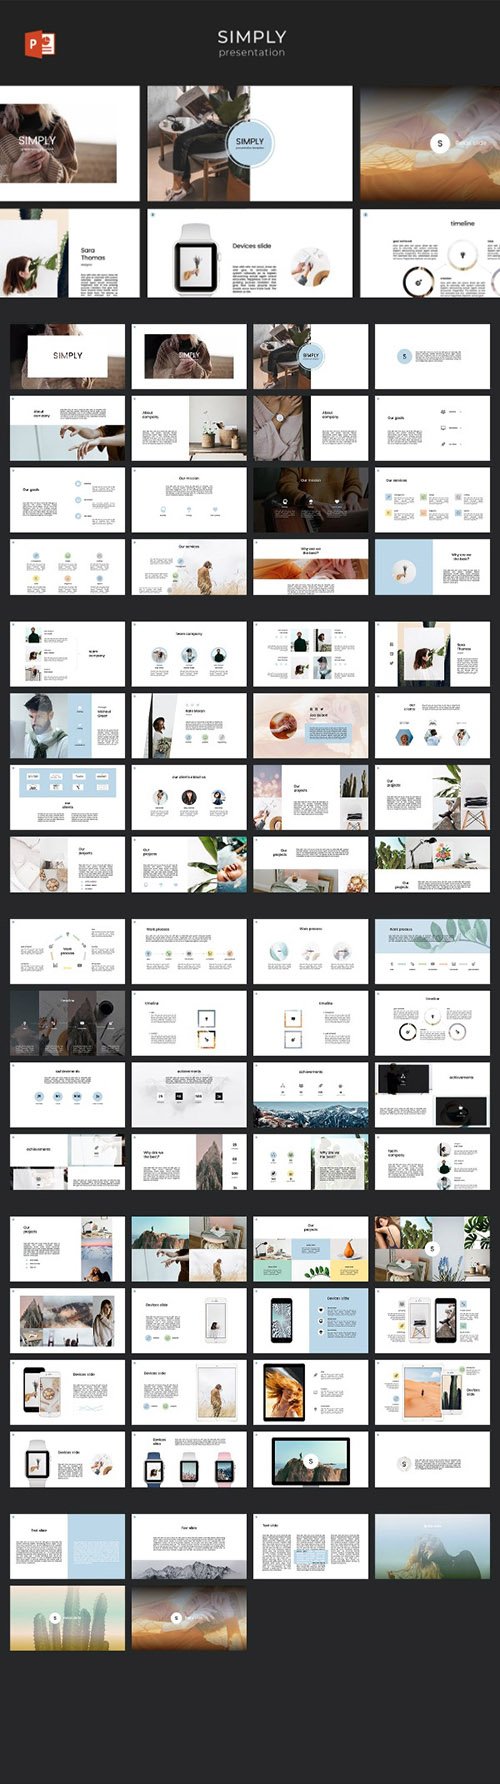 Simply PowerPoint Template